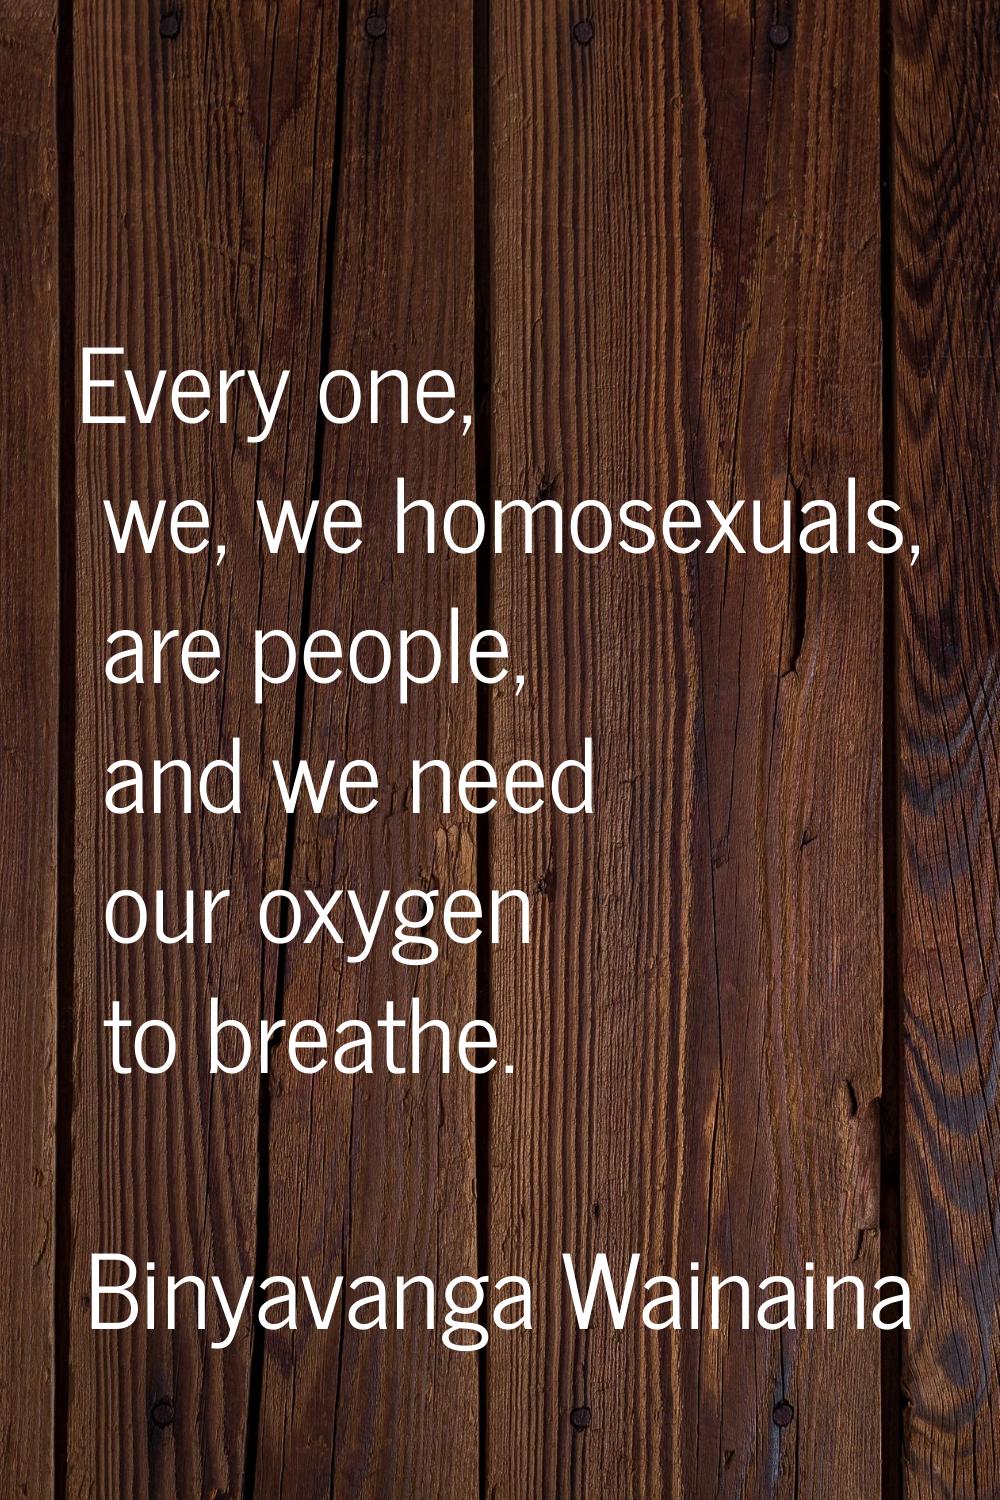 Every one, we, we homosexuals, are people, and we need our oxygen to breathe.